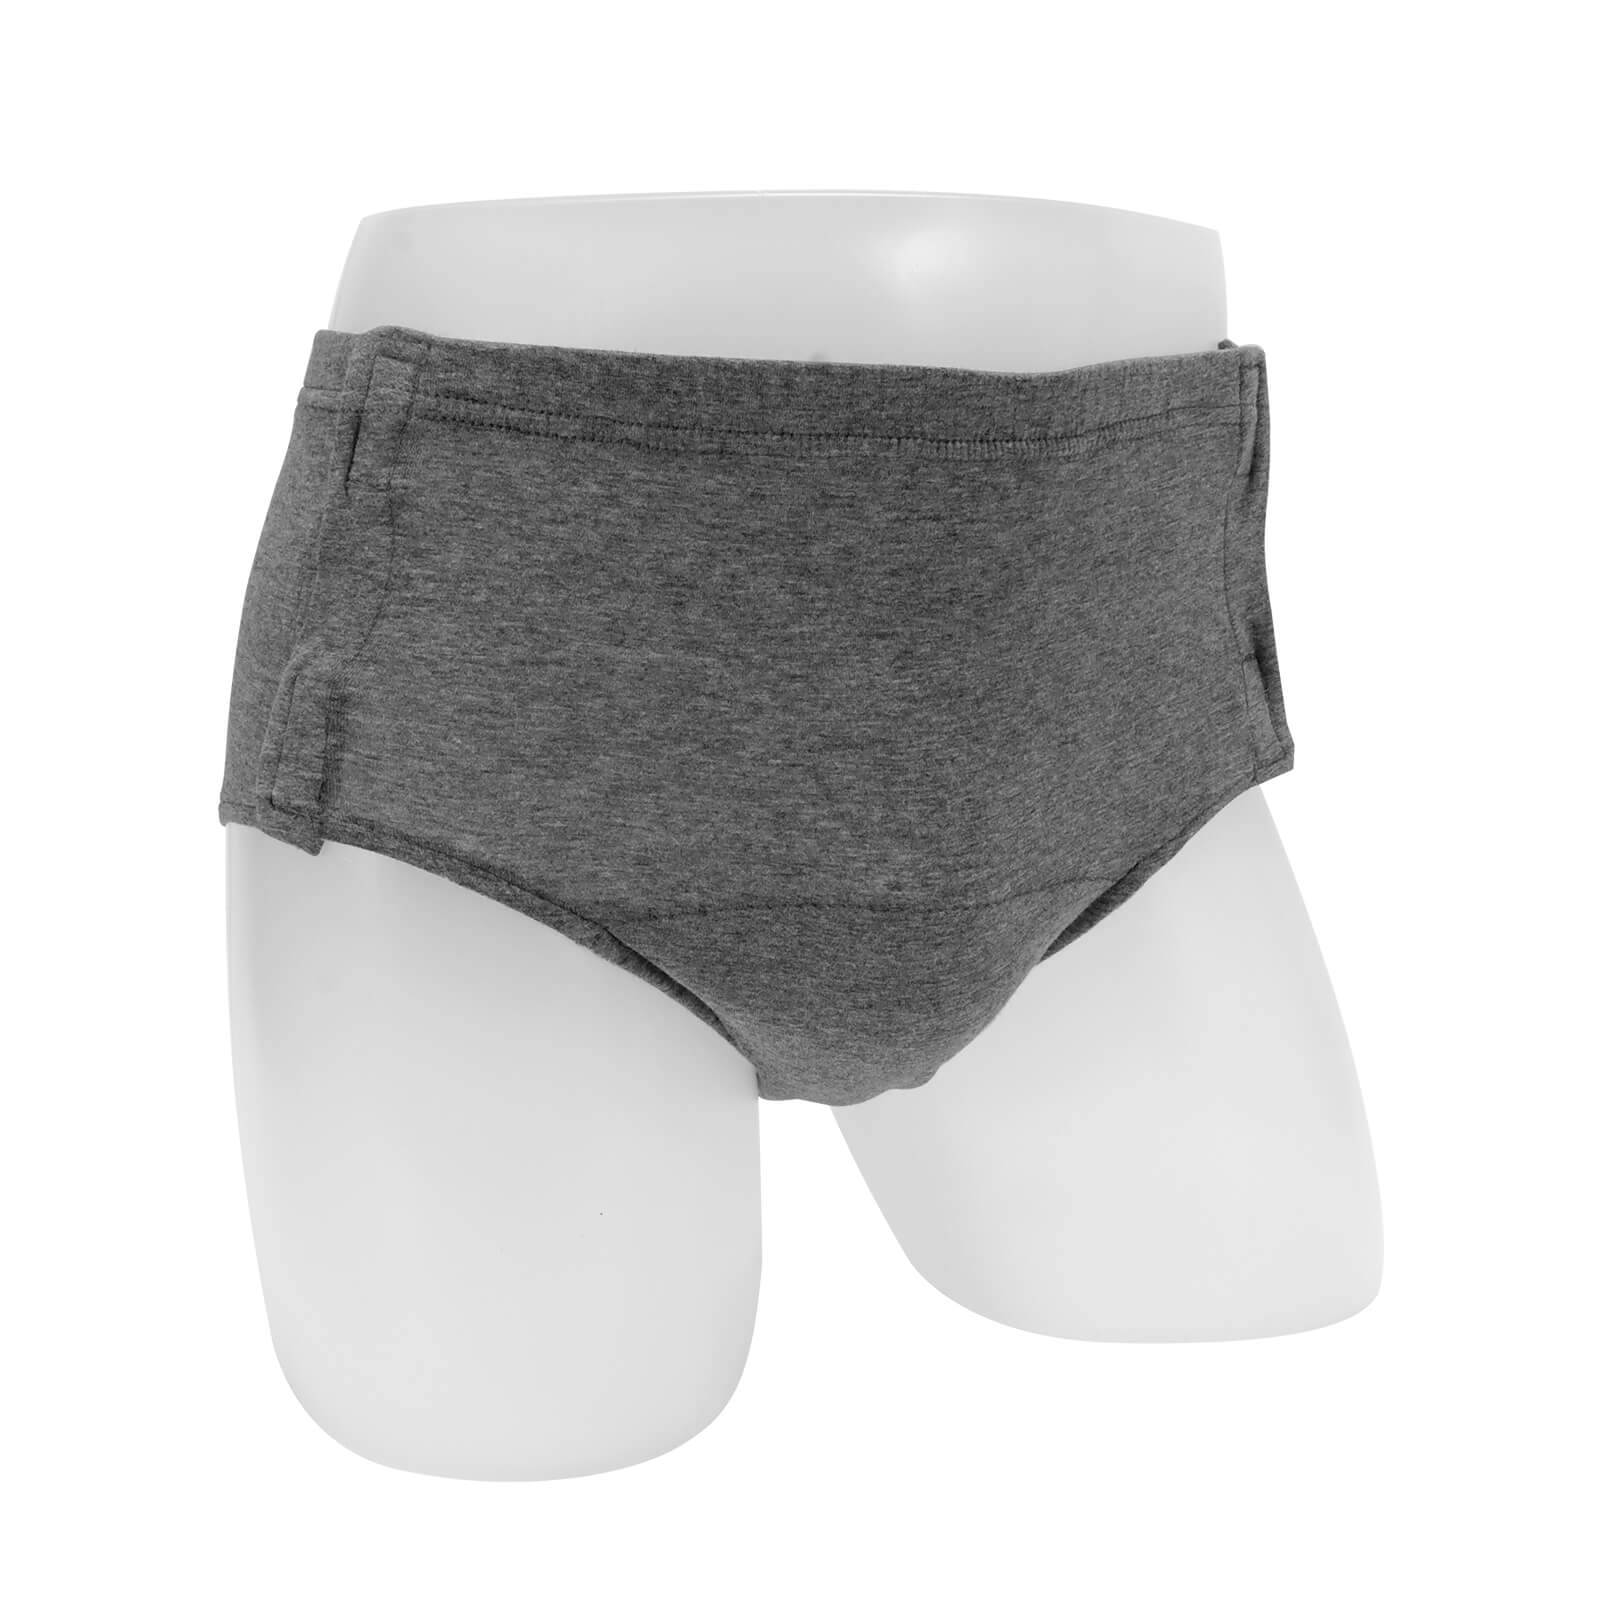 Incontinence Underwear with Velcros Super Absorbency Breathable Washable - M001